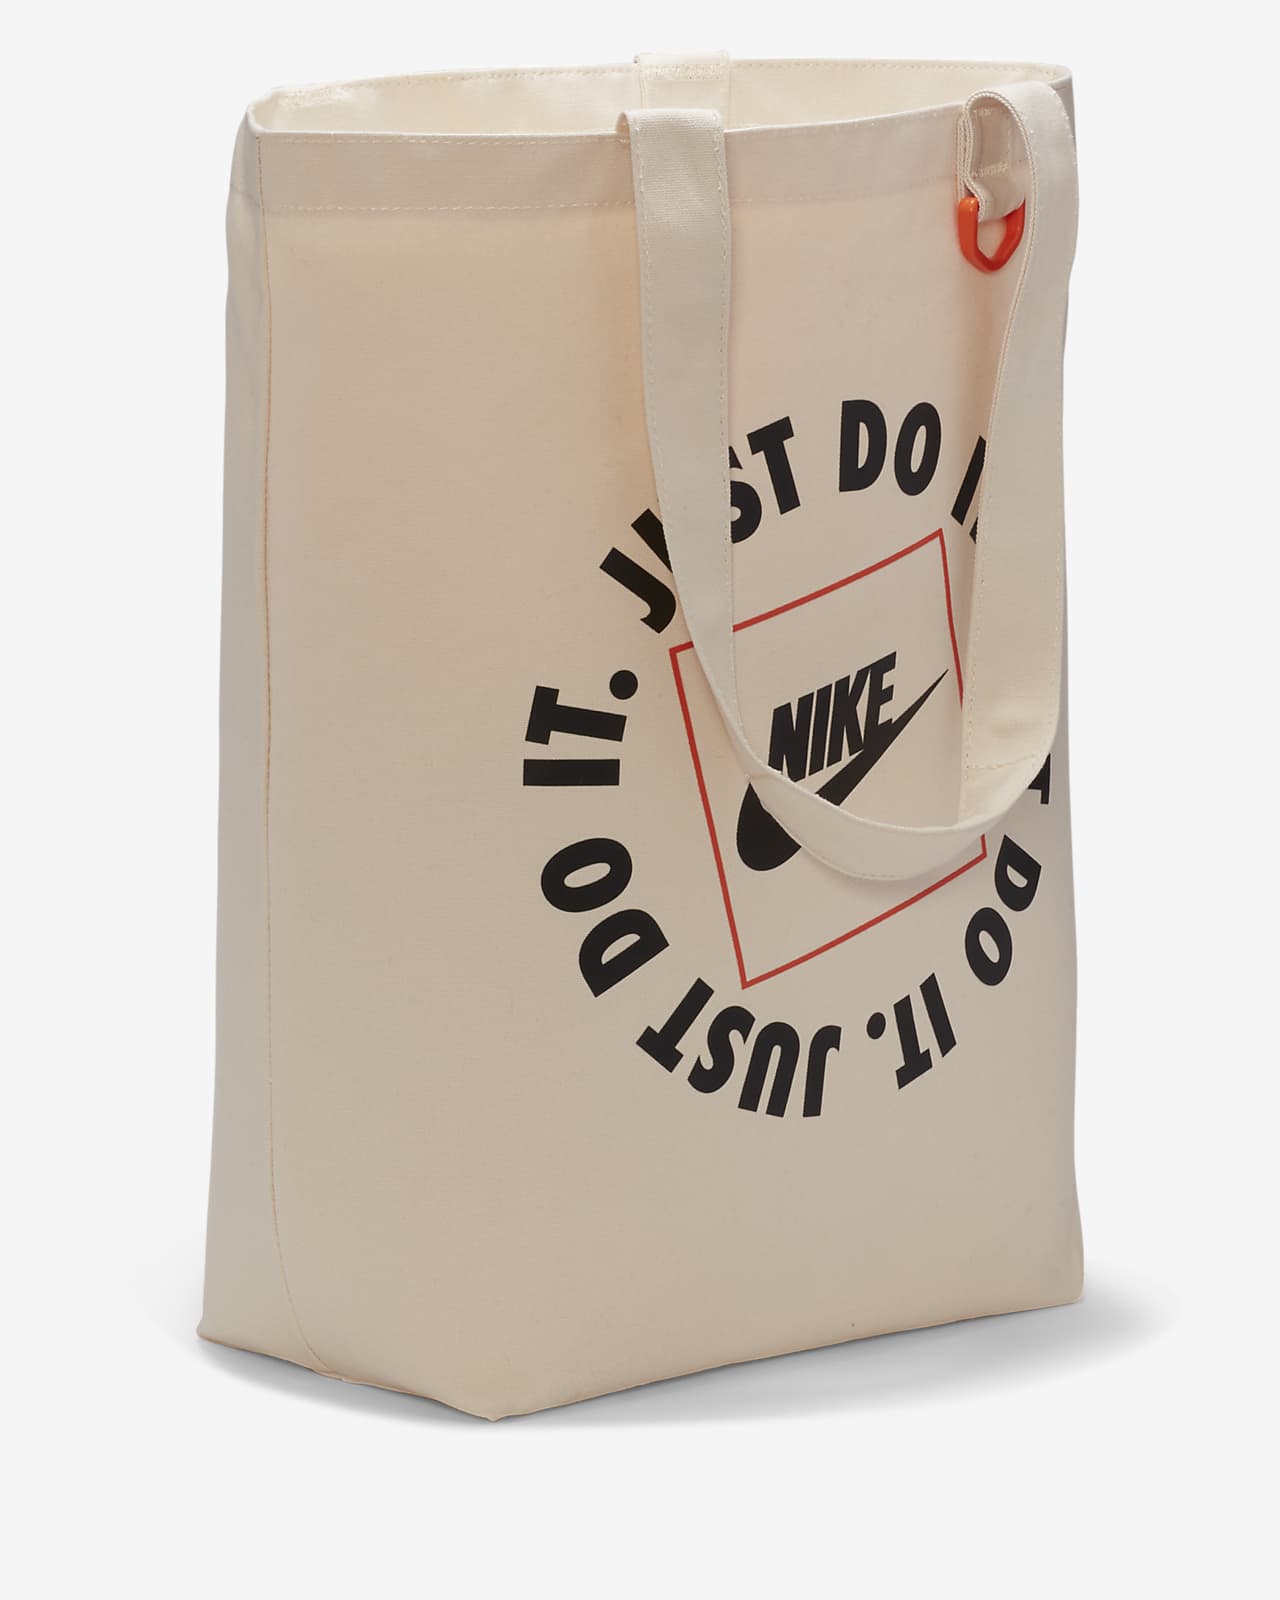 nike paper bag for sale